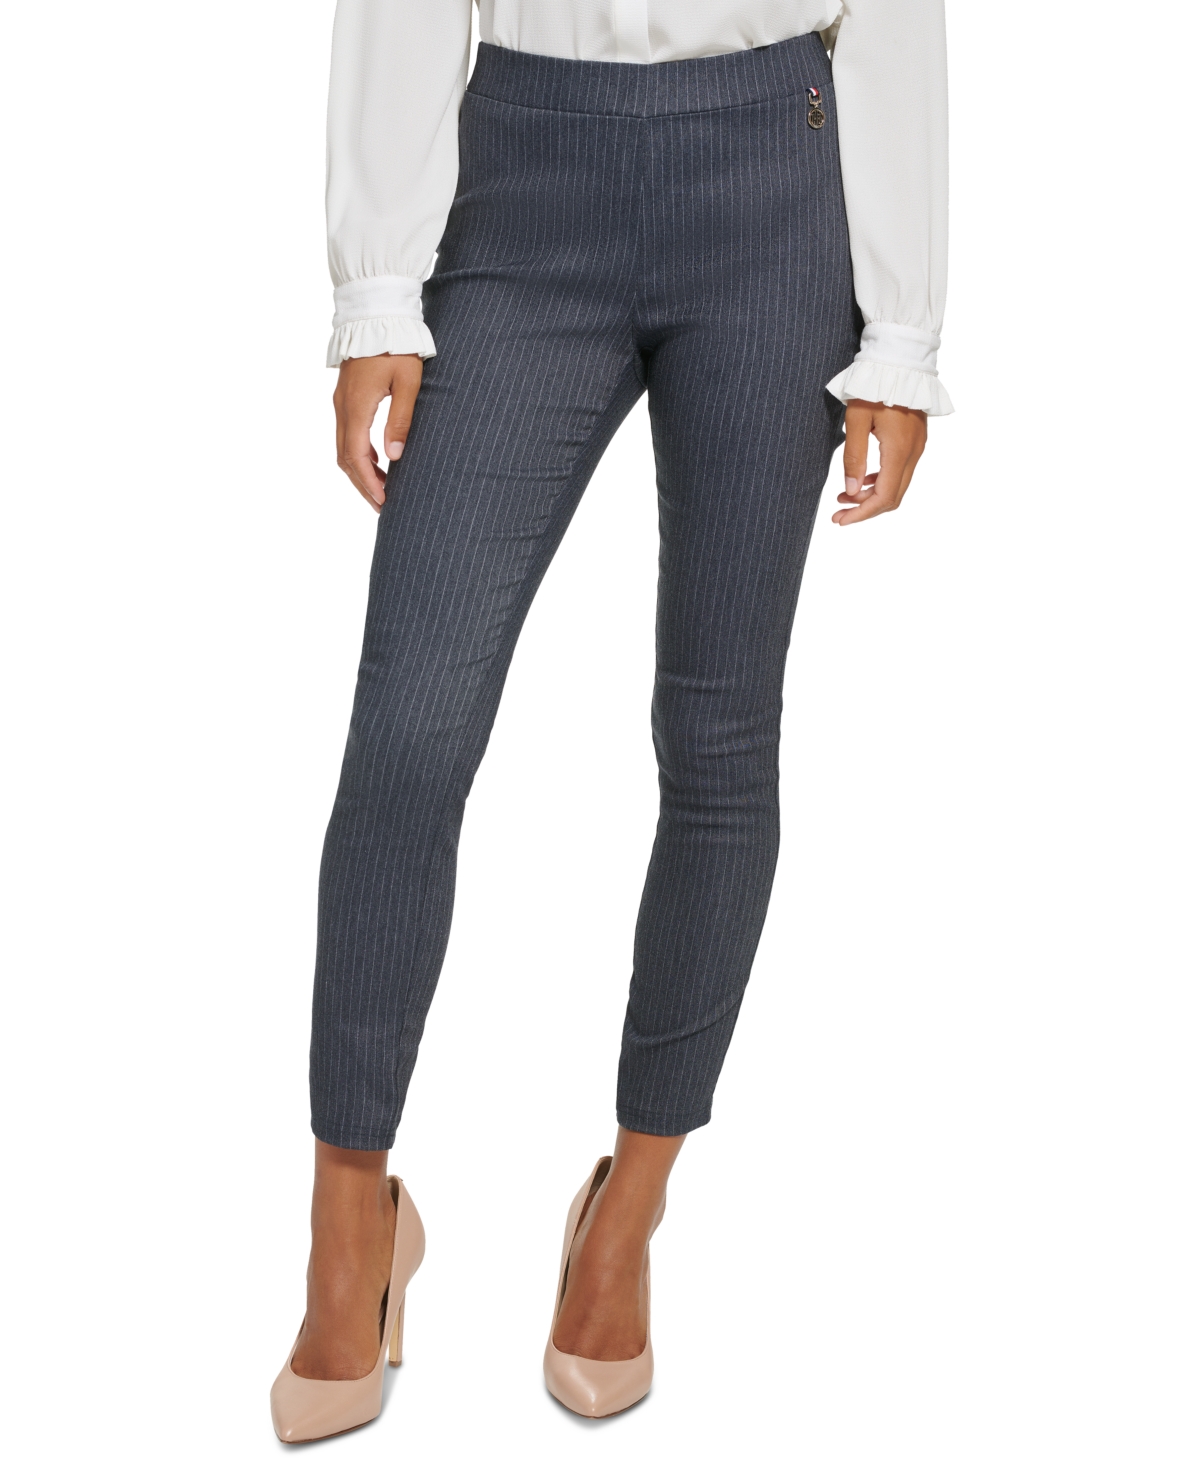 Tommy Hilfiger Women's Pinstriped Pull-On Skinny Ankle Pants